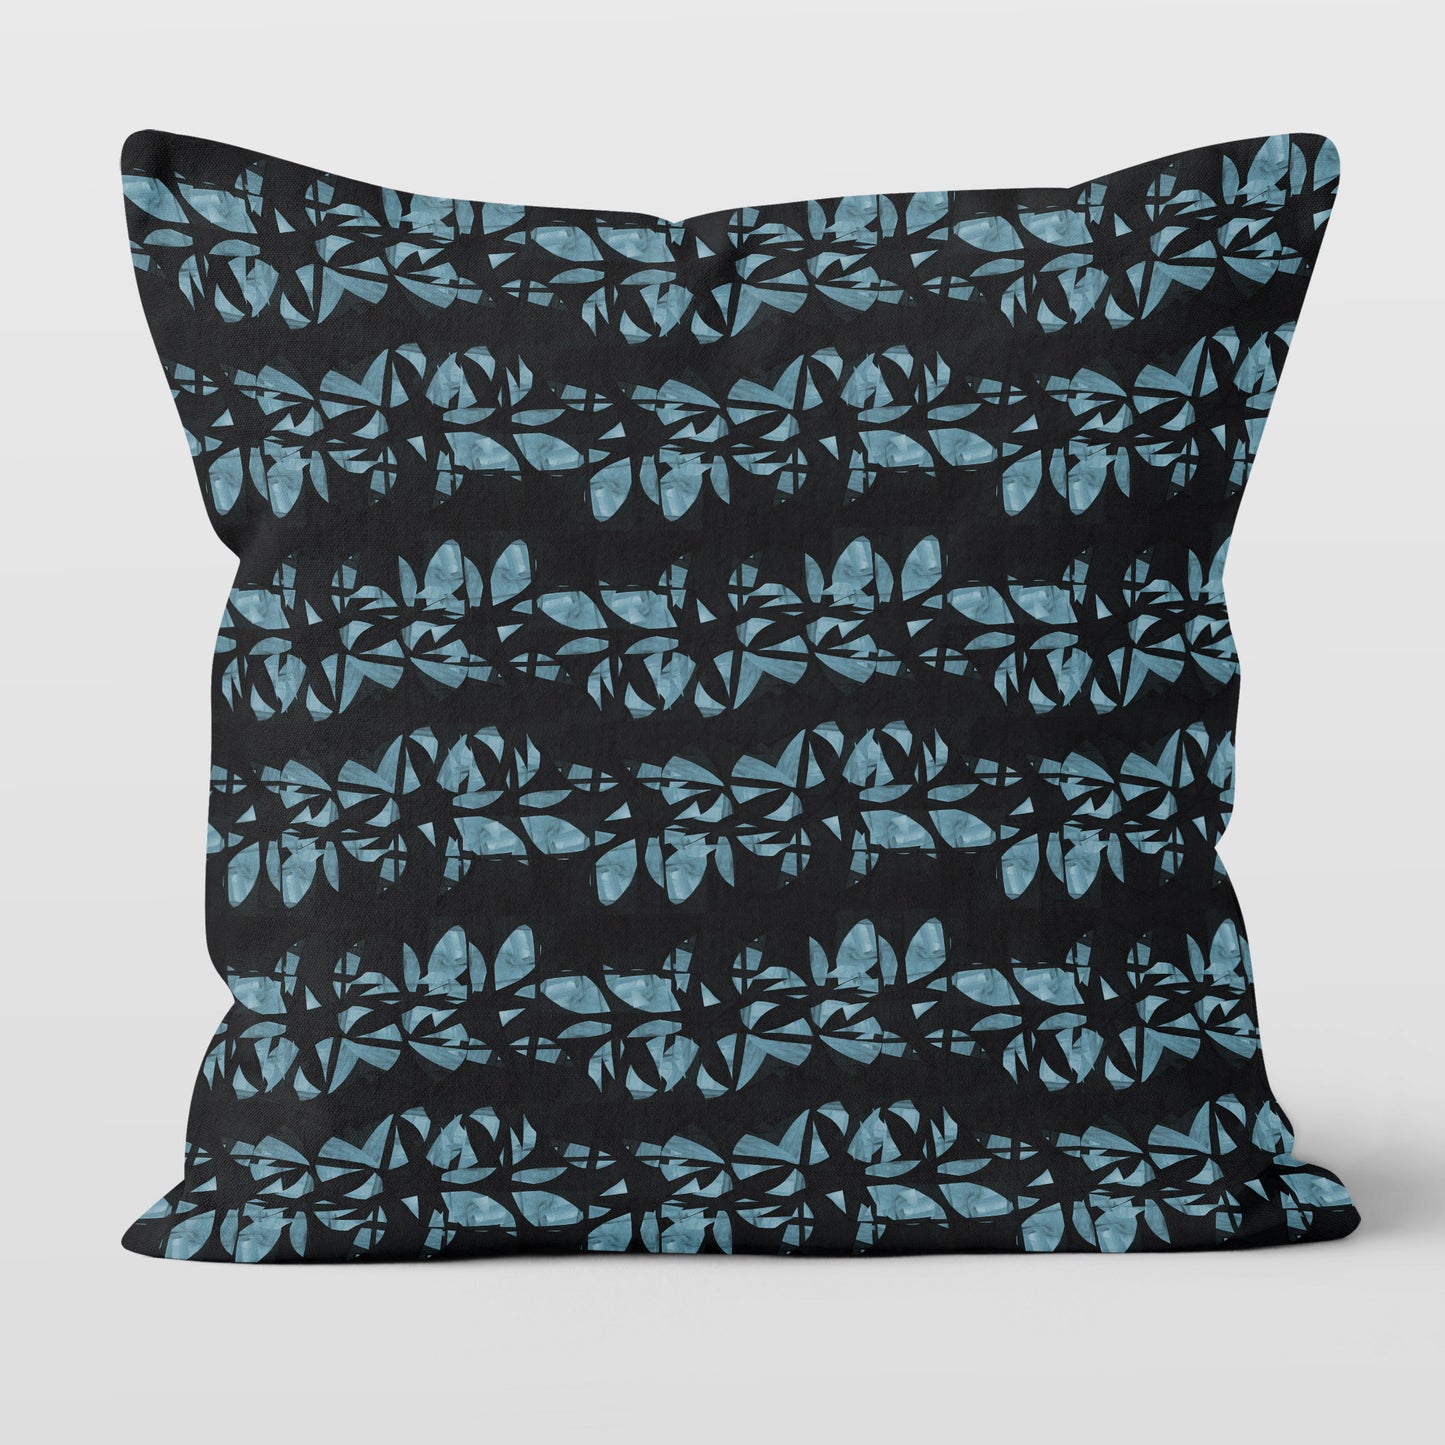 Square throw pillow featuring hand painted, abstract floral lei pattern in aqua blue and black.